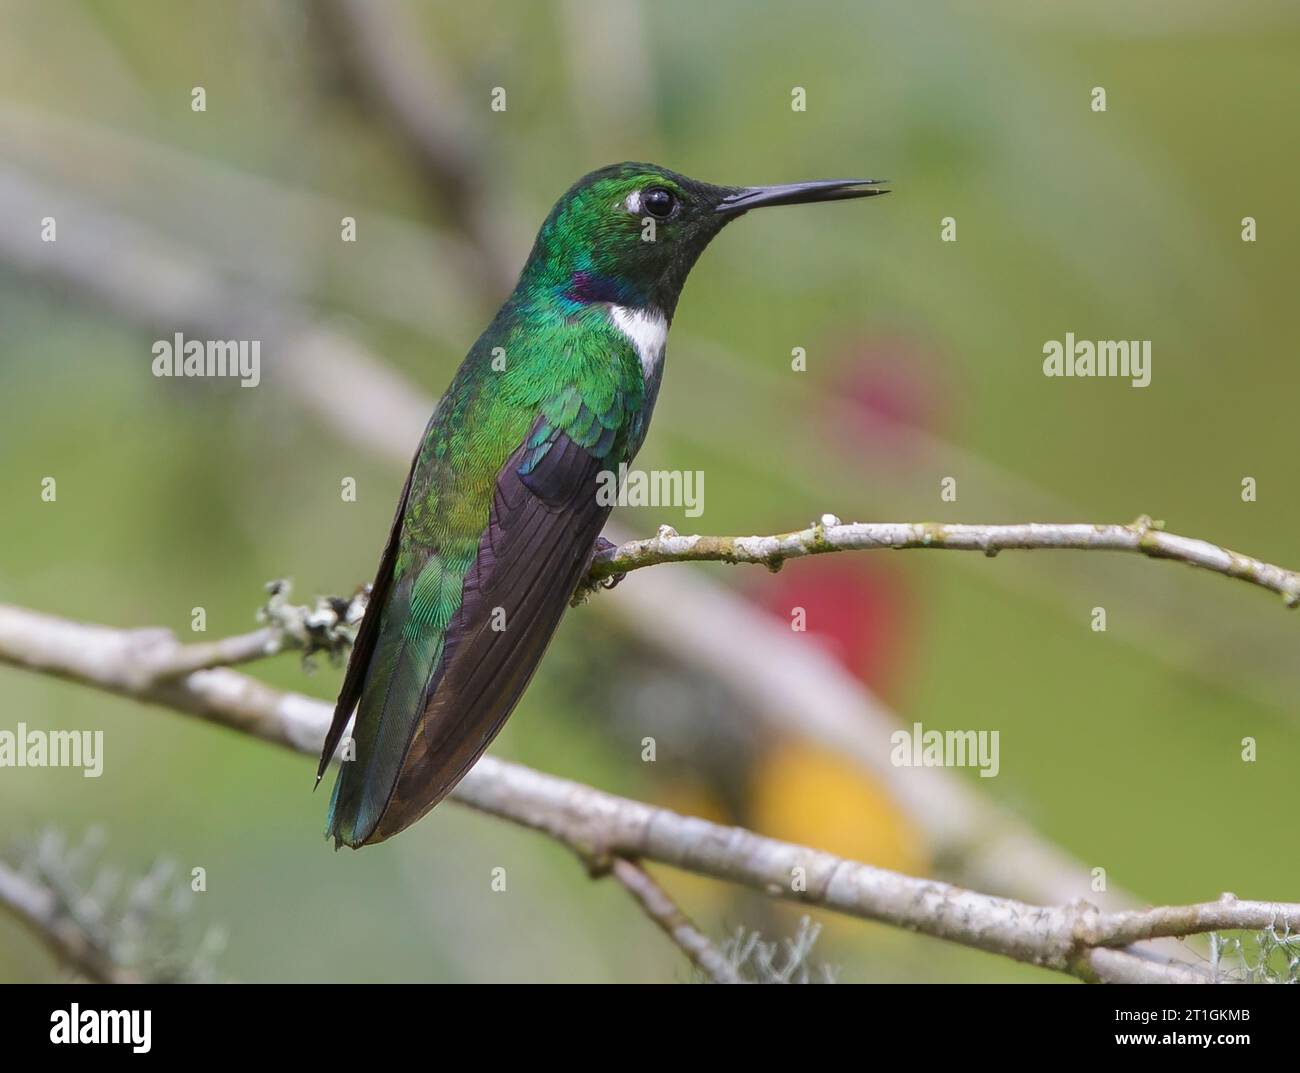 white-throated daggerbill, white-throated wedgebill, western wedge-billed hummingbird (Schistes albogularis), male perched on a branch, Colombia Stock Photo